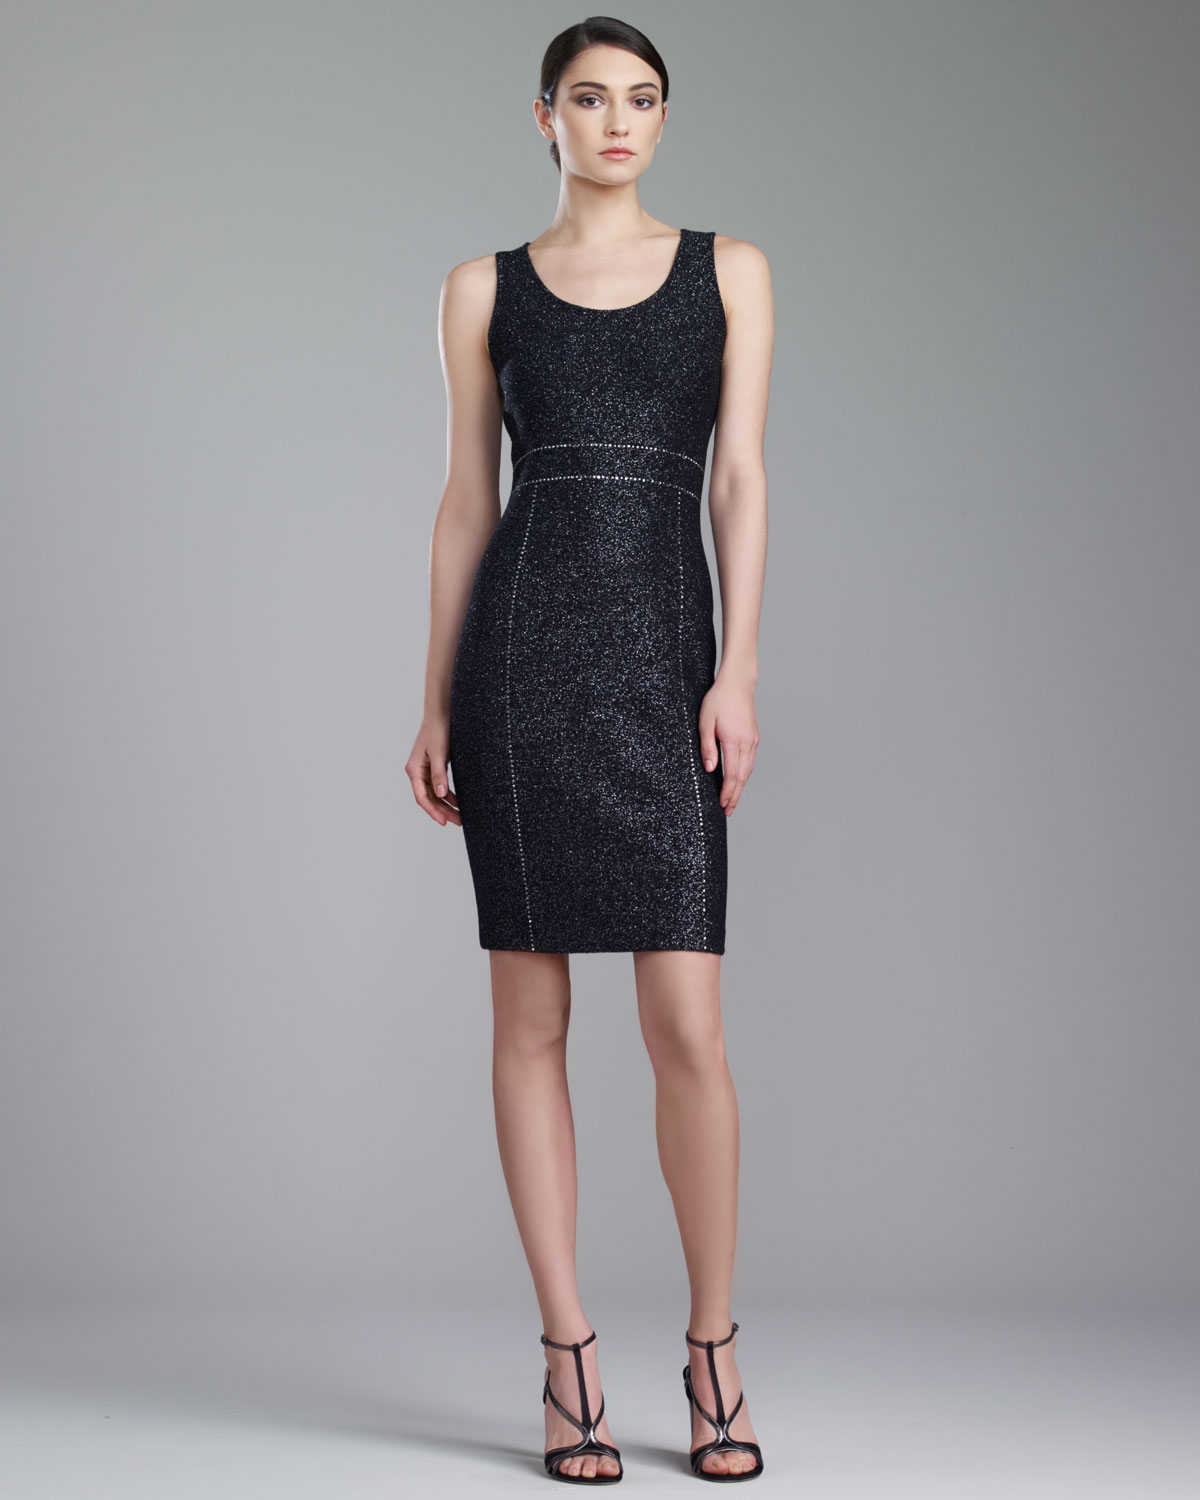 St. John Couture Shimmer Tweed Dress Caviarsilver in Black - Lyst